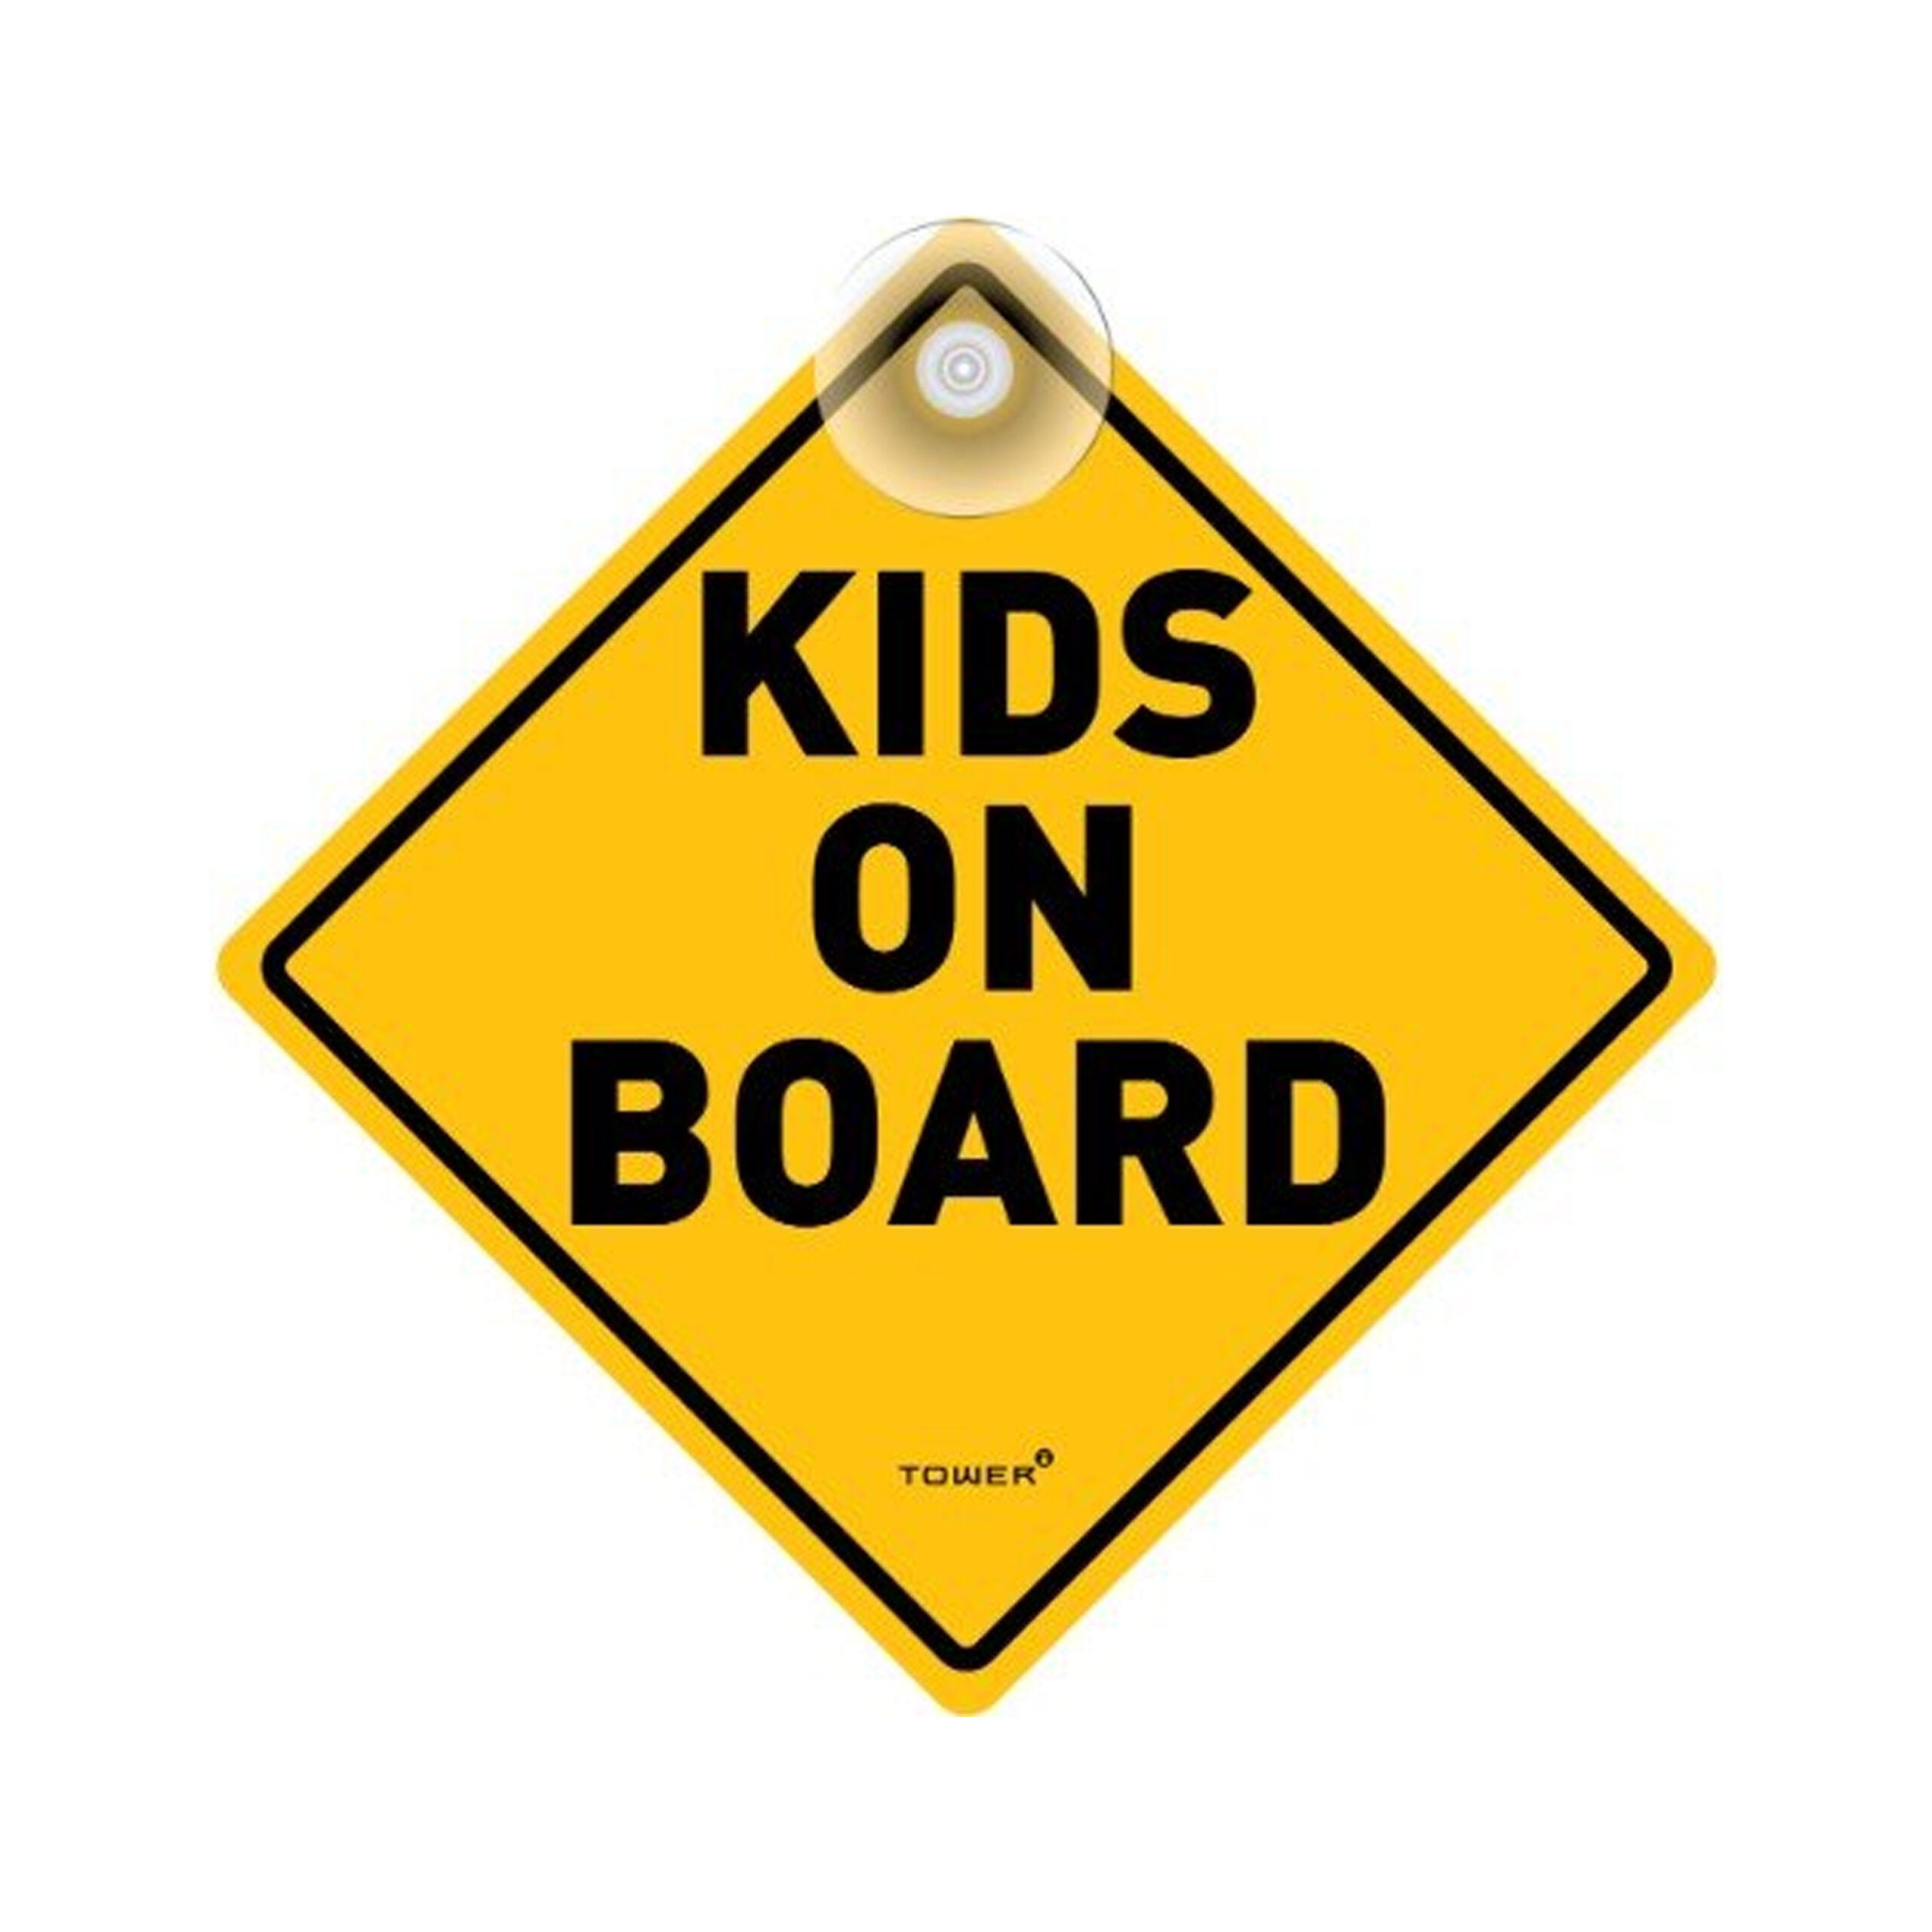 TOWER  VEHICLE
SIGN  "KIDS ON
BOARD" 
135x135mm